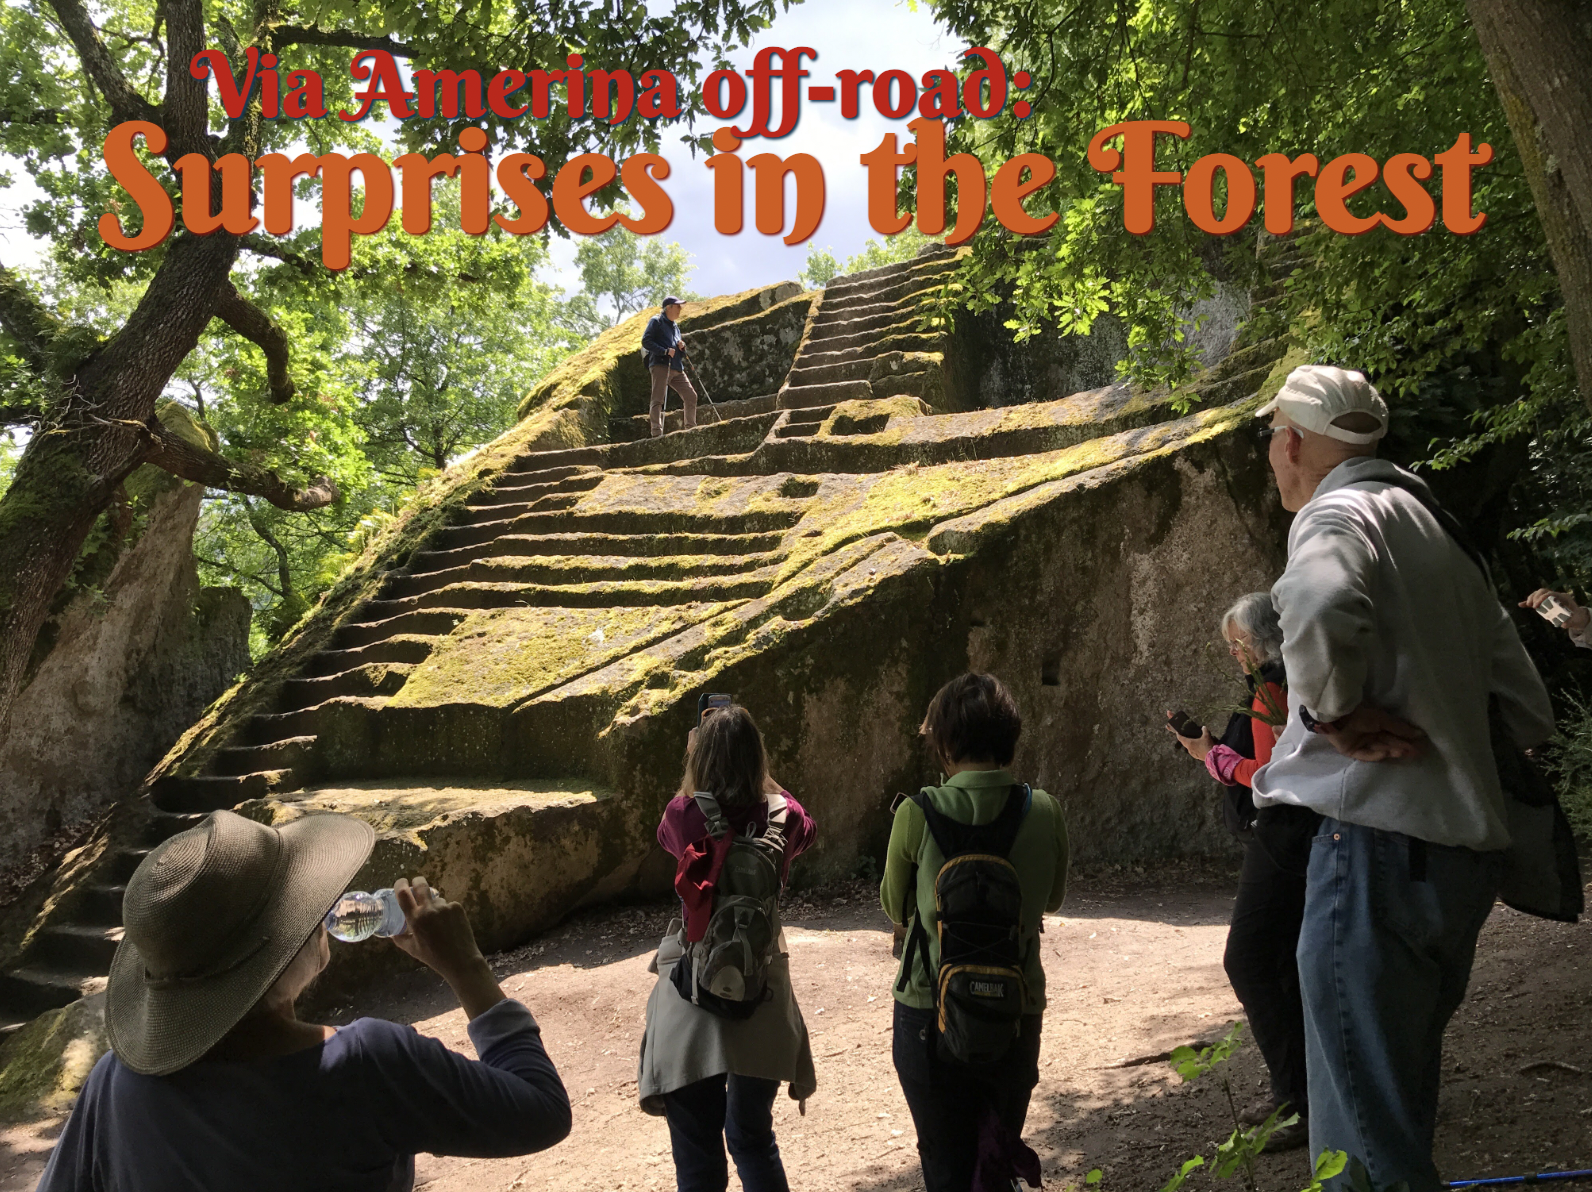 Via Amerina: Surprises in the Forest